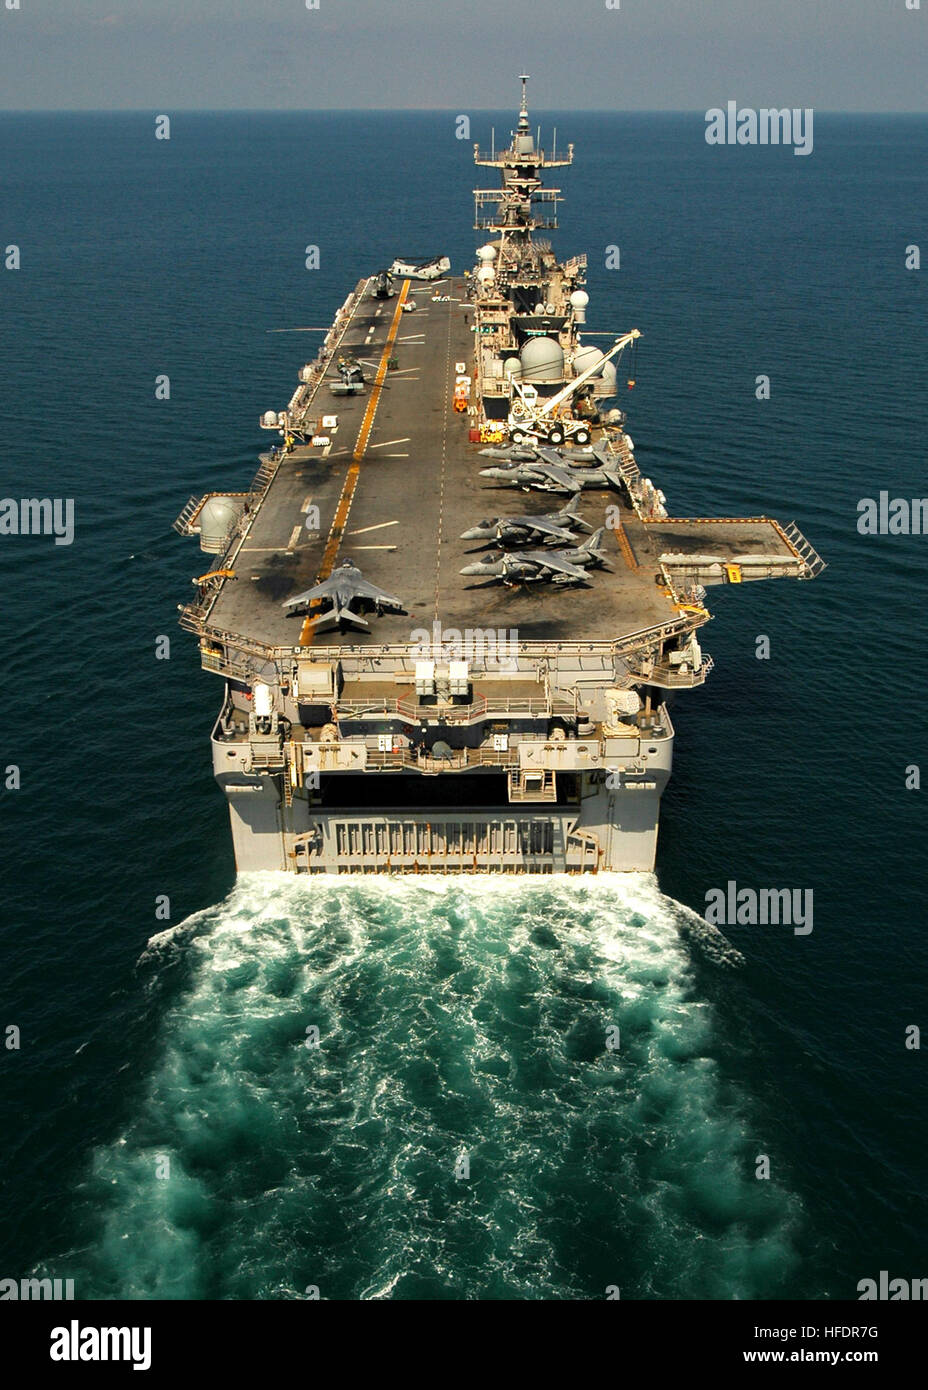 The multi-purpose amphibious assault ship USS Iwo Jima transits the Persian Gulf. Iwo Jima is deployed as part of the Iwo Jima Expeditionary Strike Group supporting maritime security operations in the U.S. 5th Fleet area of responsibility. Bilateral exercise in the Persian Gulf 131493 Stock Photo